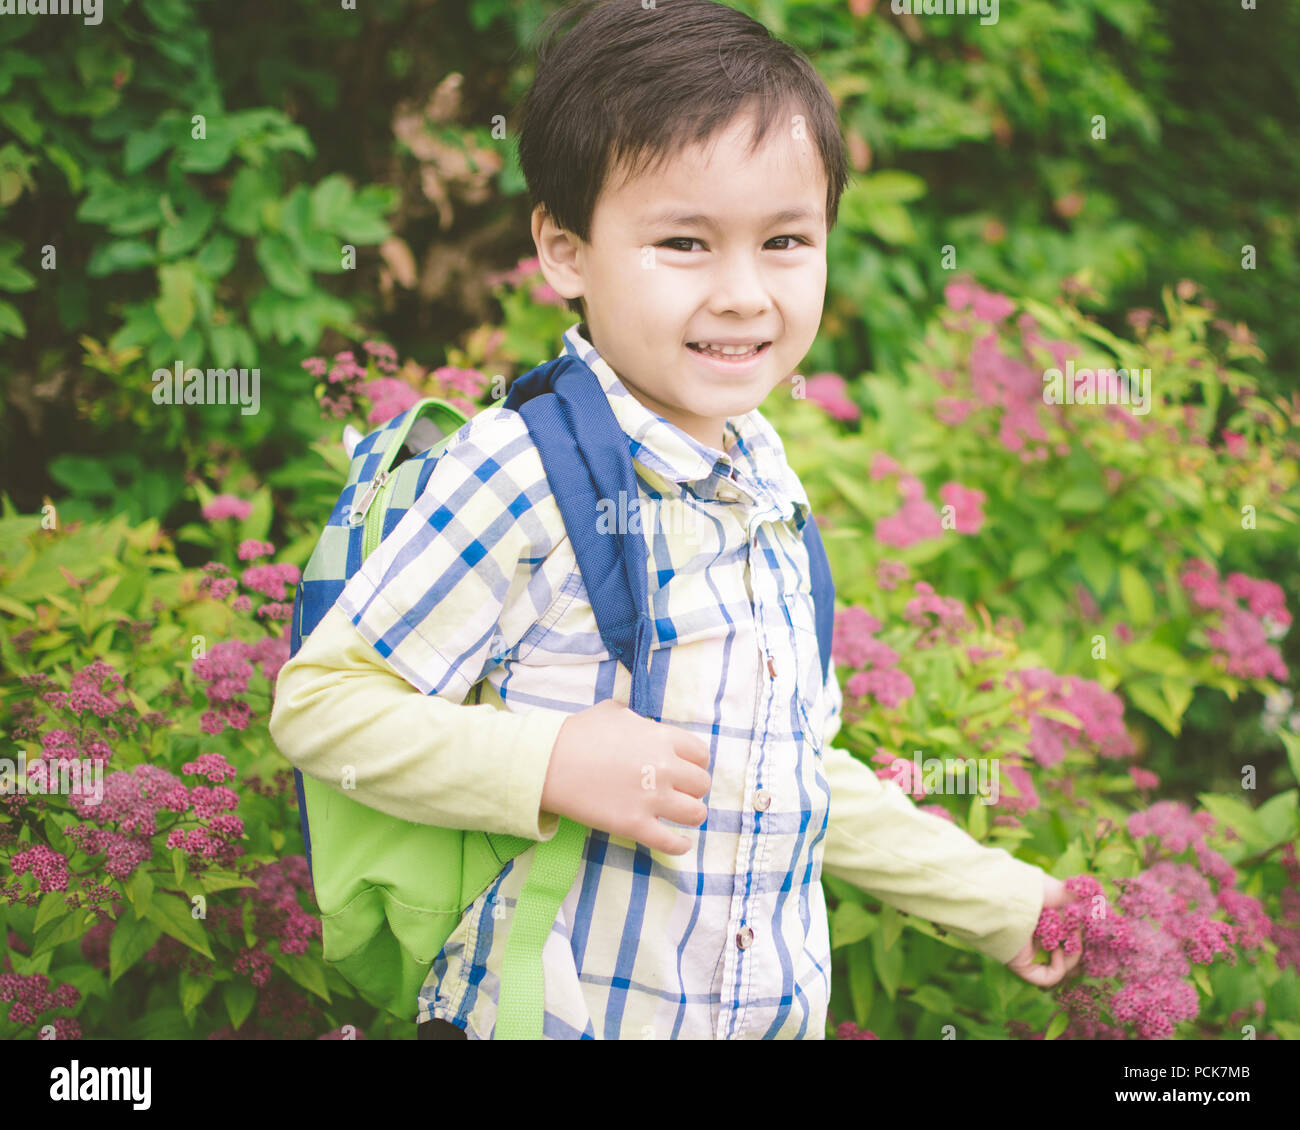 Young Boy Holding A Backpack Is Excited To Go Back To School Young Boy Holding A Backpack Is Excited To Go Back To School Stock Photo